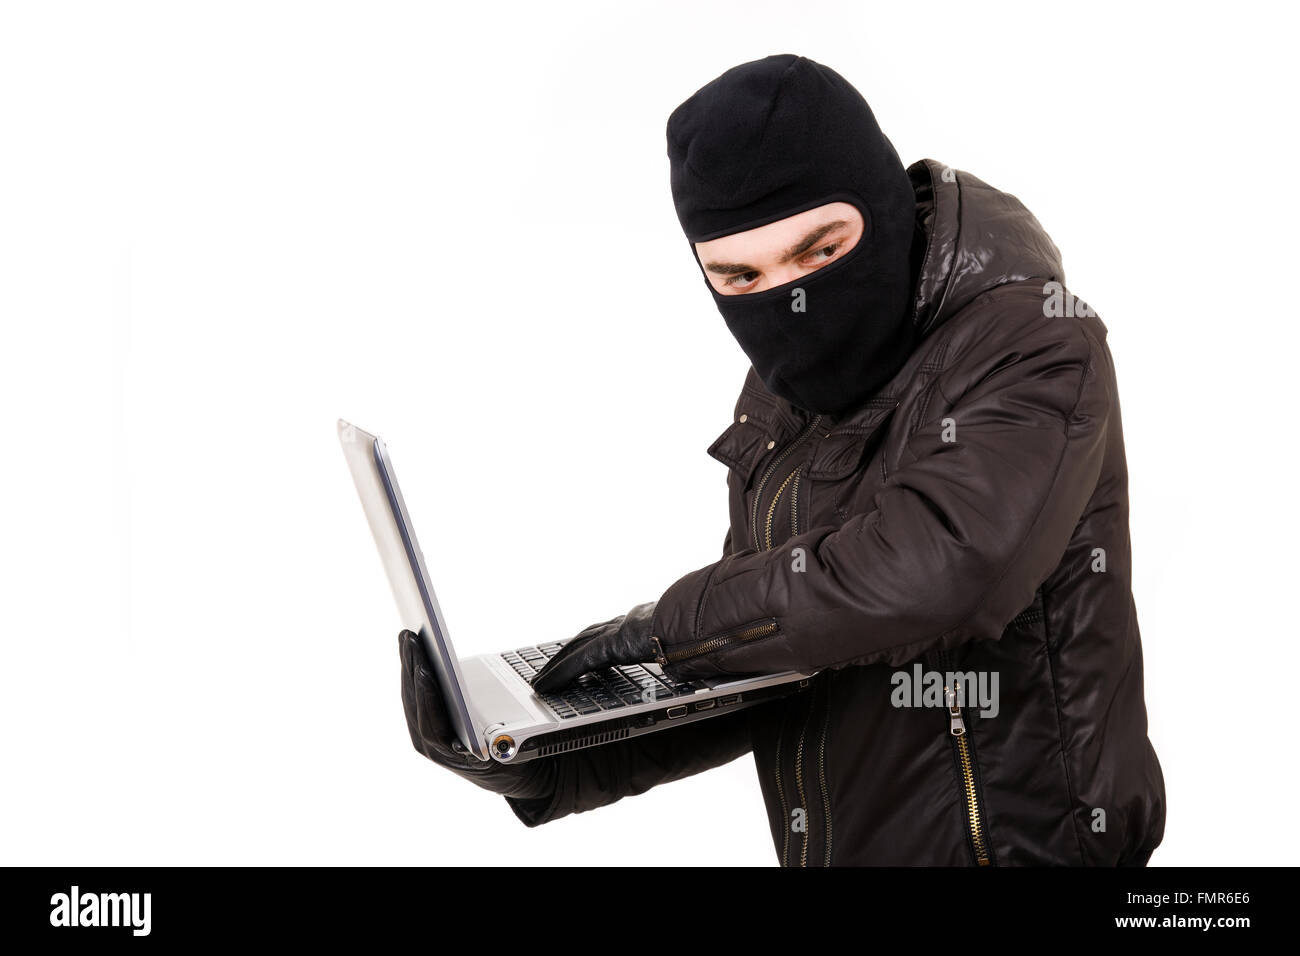 Computer Hacker, isolated over white background Stock Photo